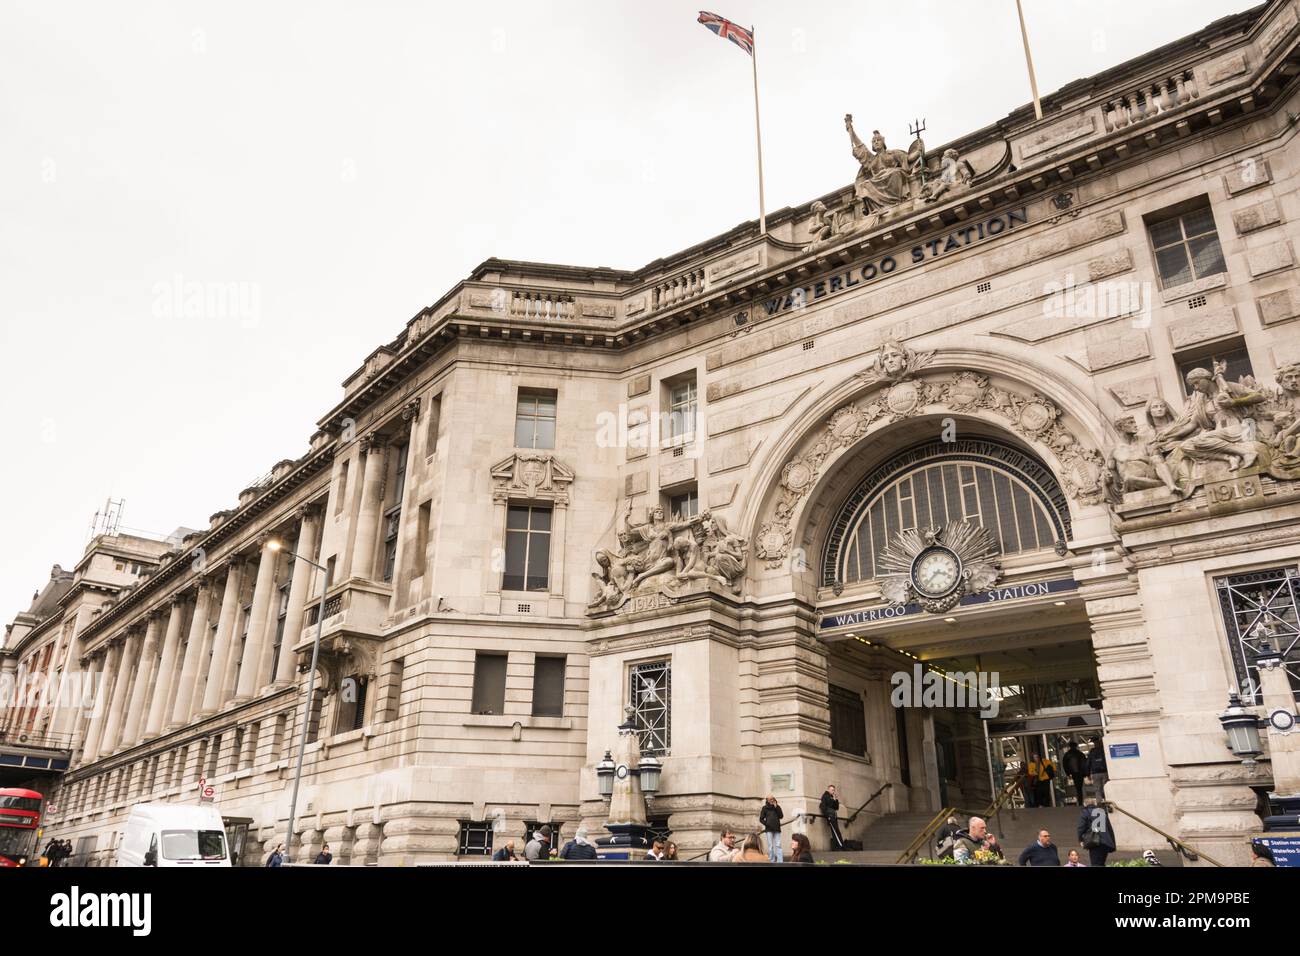 The facade and entrance to Waterloo Station, Waterloo, London, SE1, England, UK Stock Photo